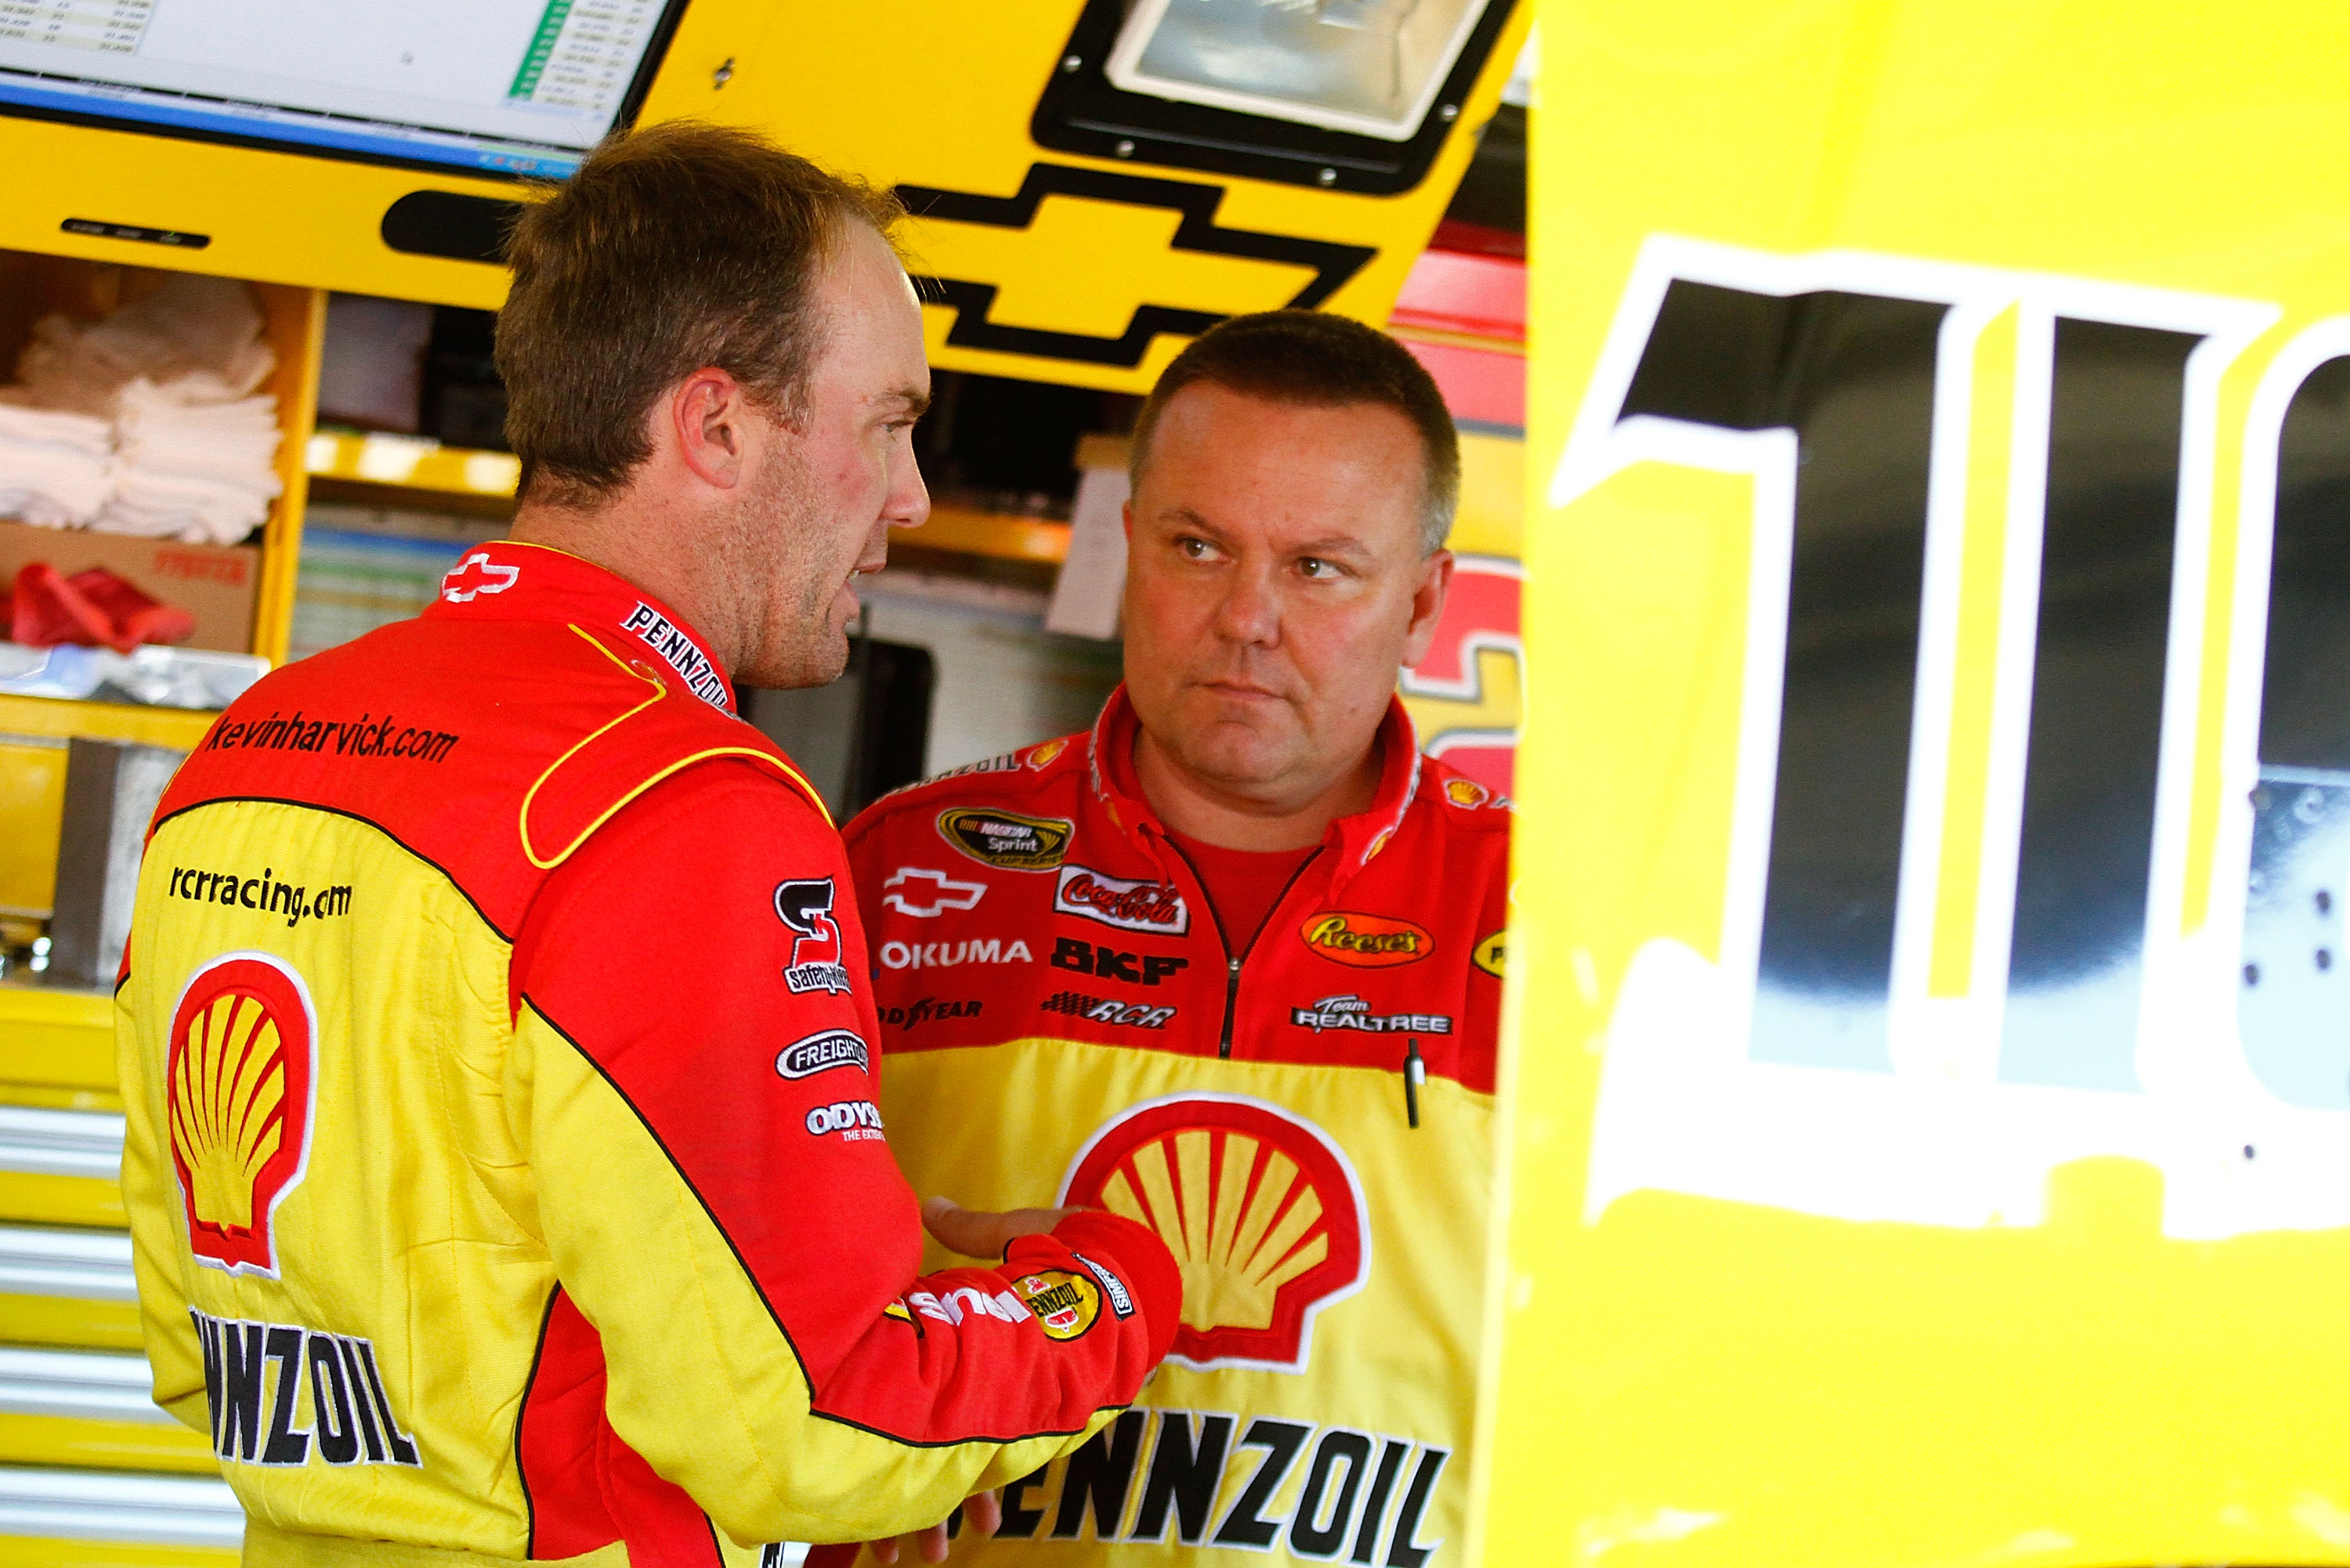 KANSAS CITY, KS - OCTOBER 01:  Kevin Harvick (L), driver of the #29 Shell/Pennzoil Chevrolet speaks with crew chief Gil Martin (R), during practice for the NASCAR Sprint Cup Series Price Chopper 400 on October 1, 2010 in Kansas City, Kansas.  (Photo by Ja